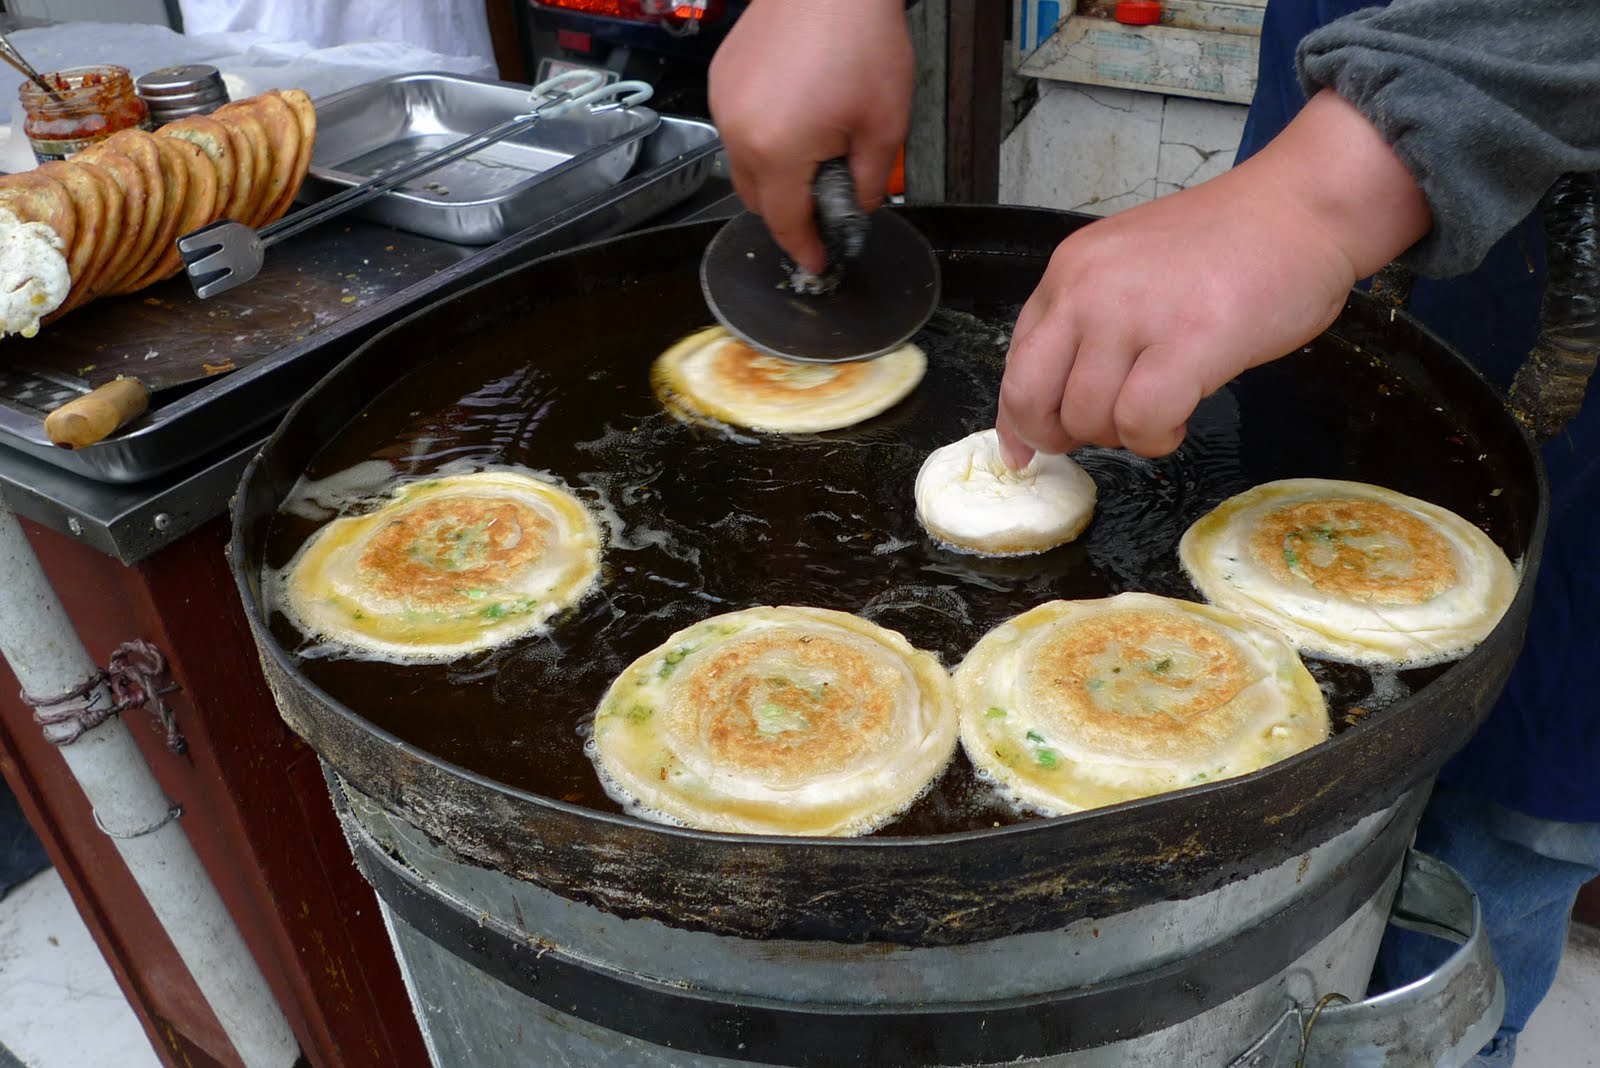 Download this Shanghai Street Food picture